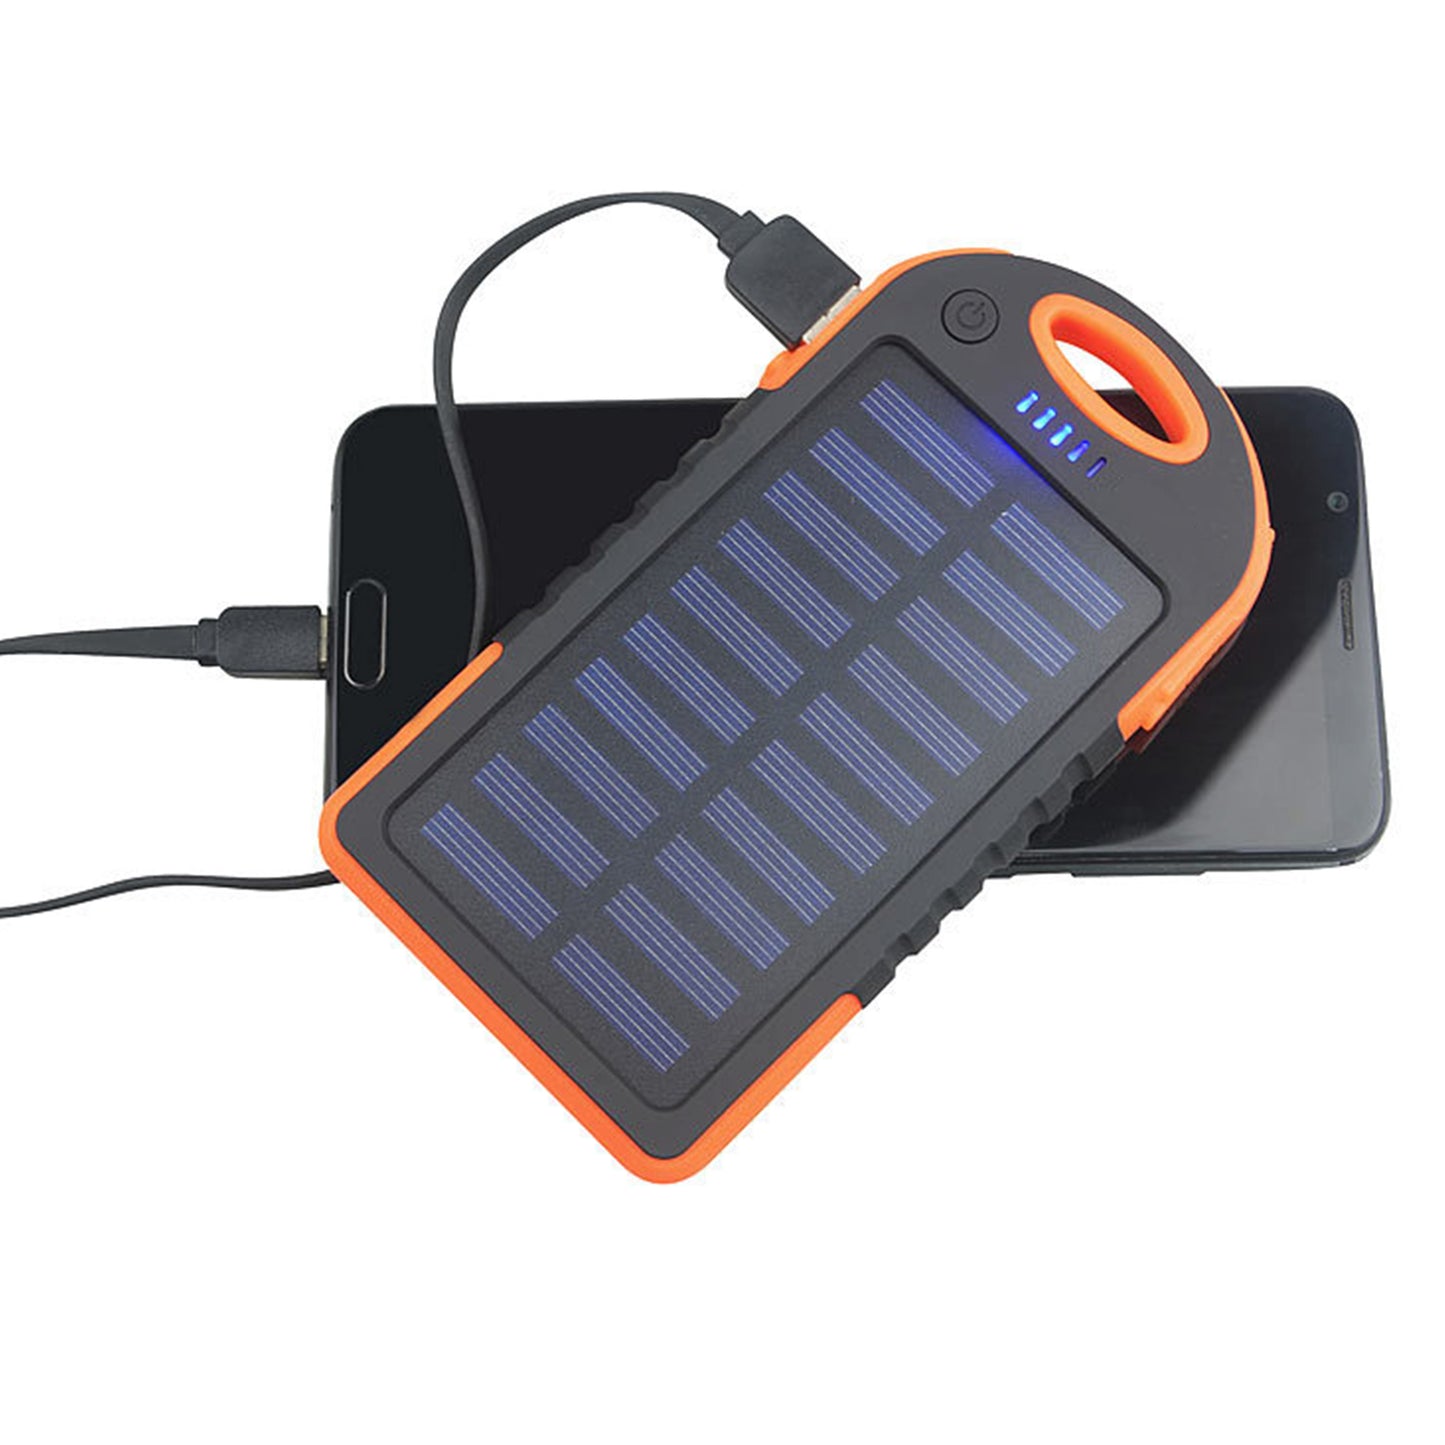 Solar Powerbank Premium - charge your devices everywhere - test winner